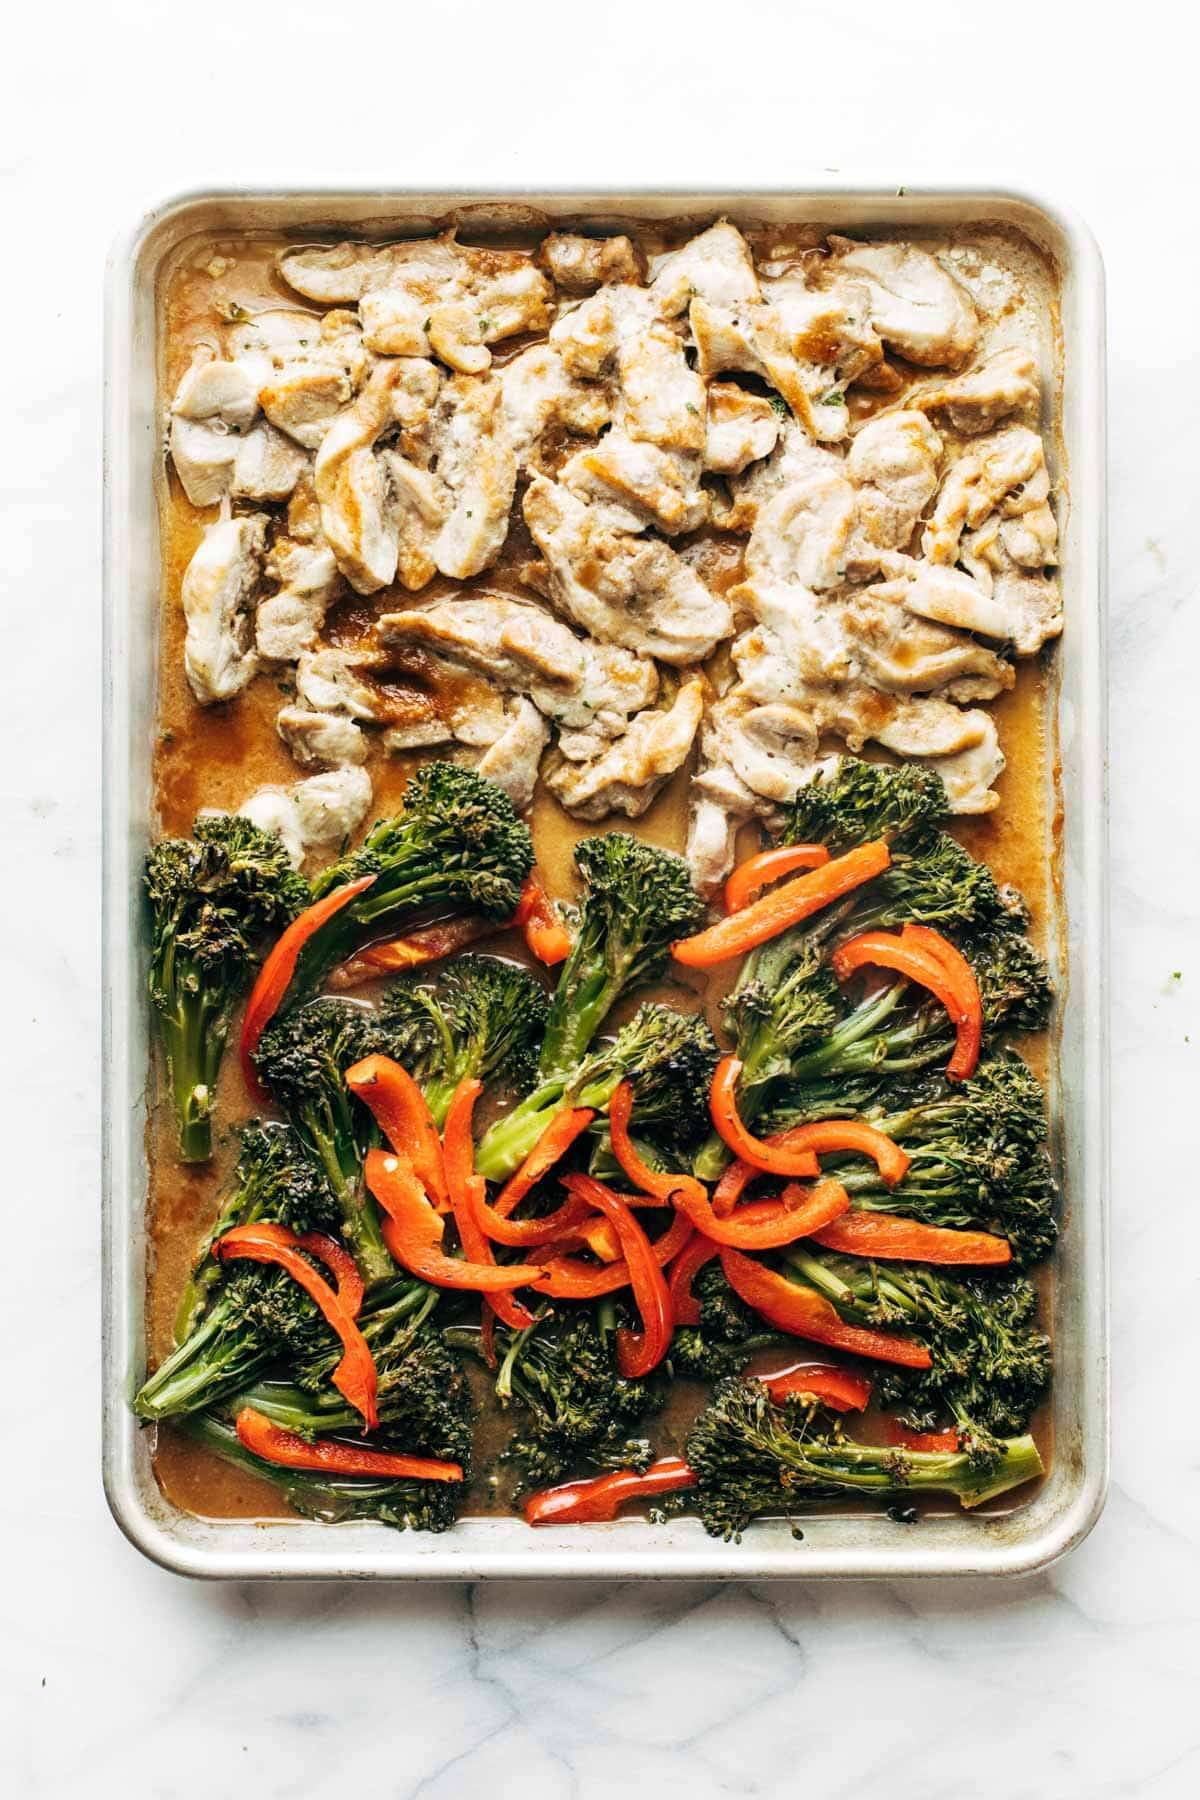 Garlic Ginger Chicken and Broccoli baked on sheet pan.